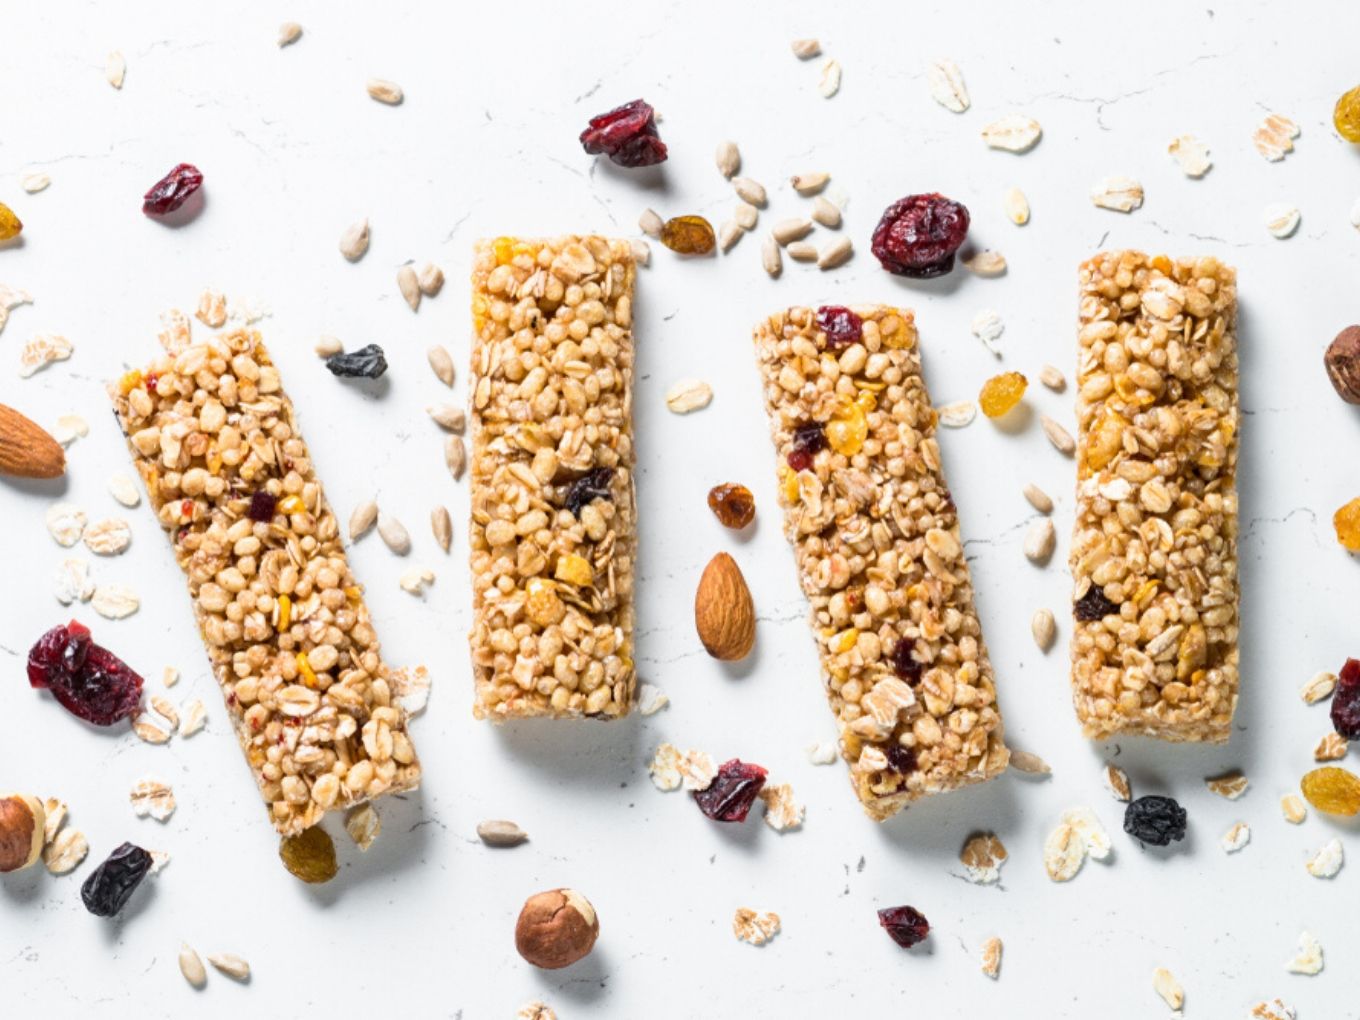 Protein Bar Brand ‘And Nothing Else’ Gets Funding From Matrix Partners, Sauce.vc